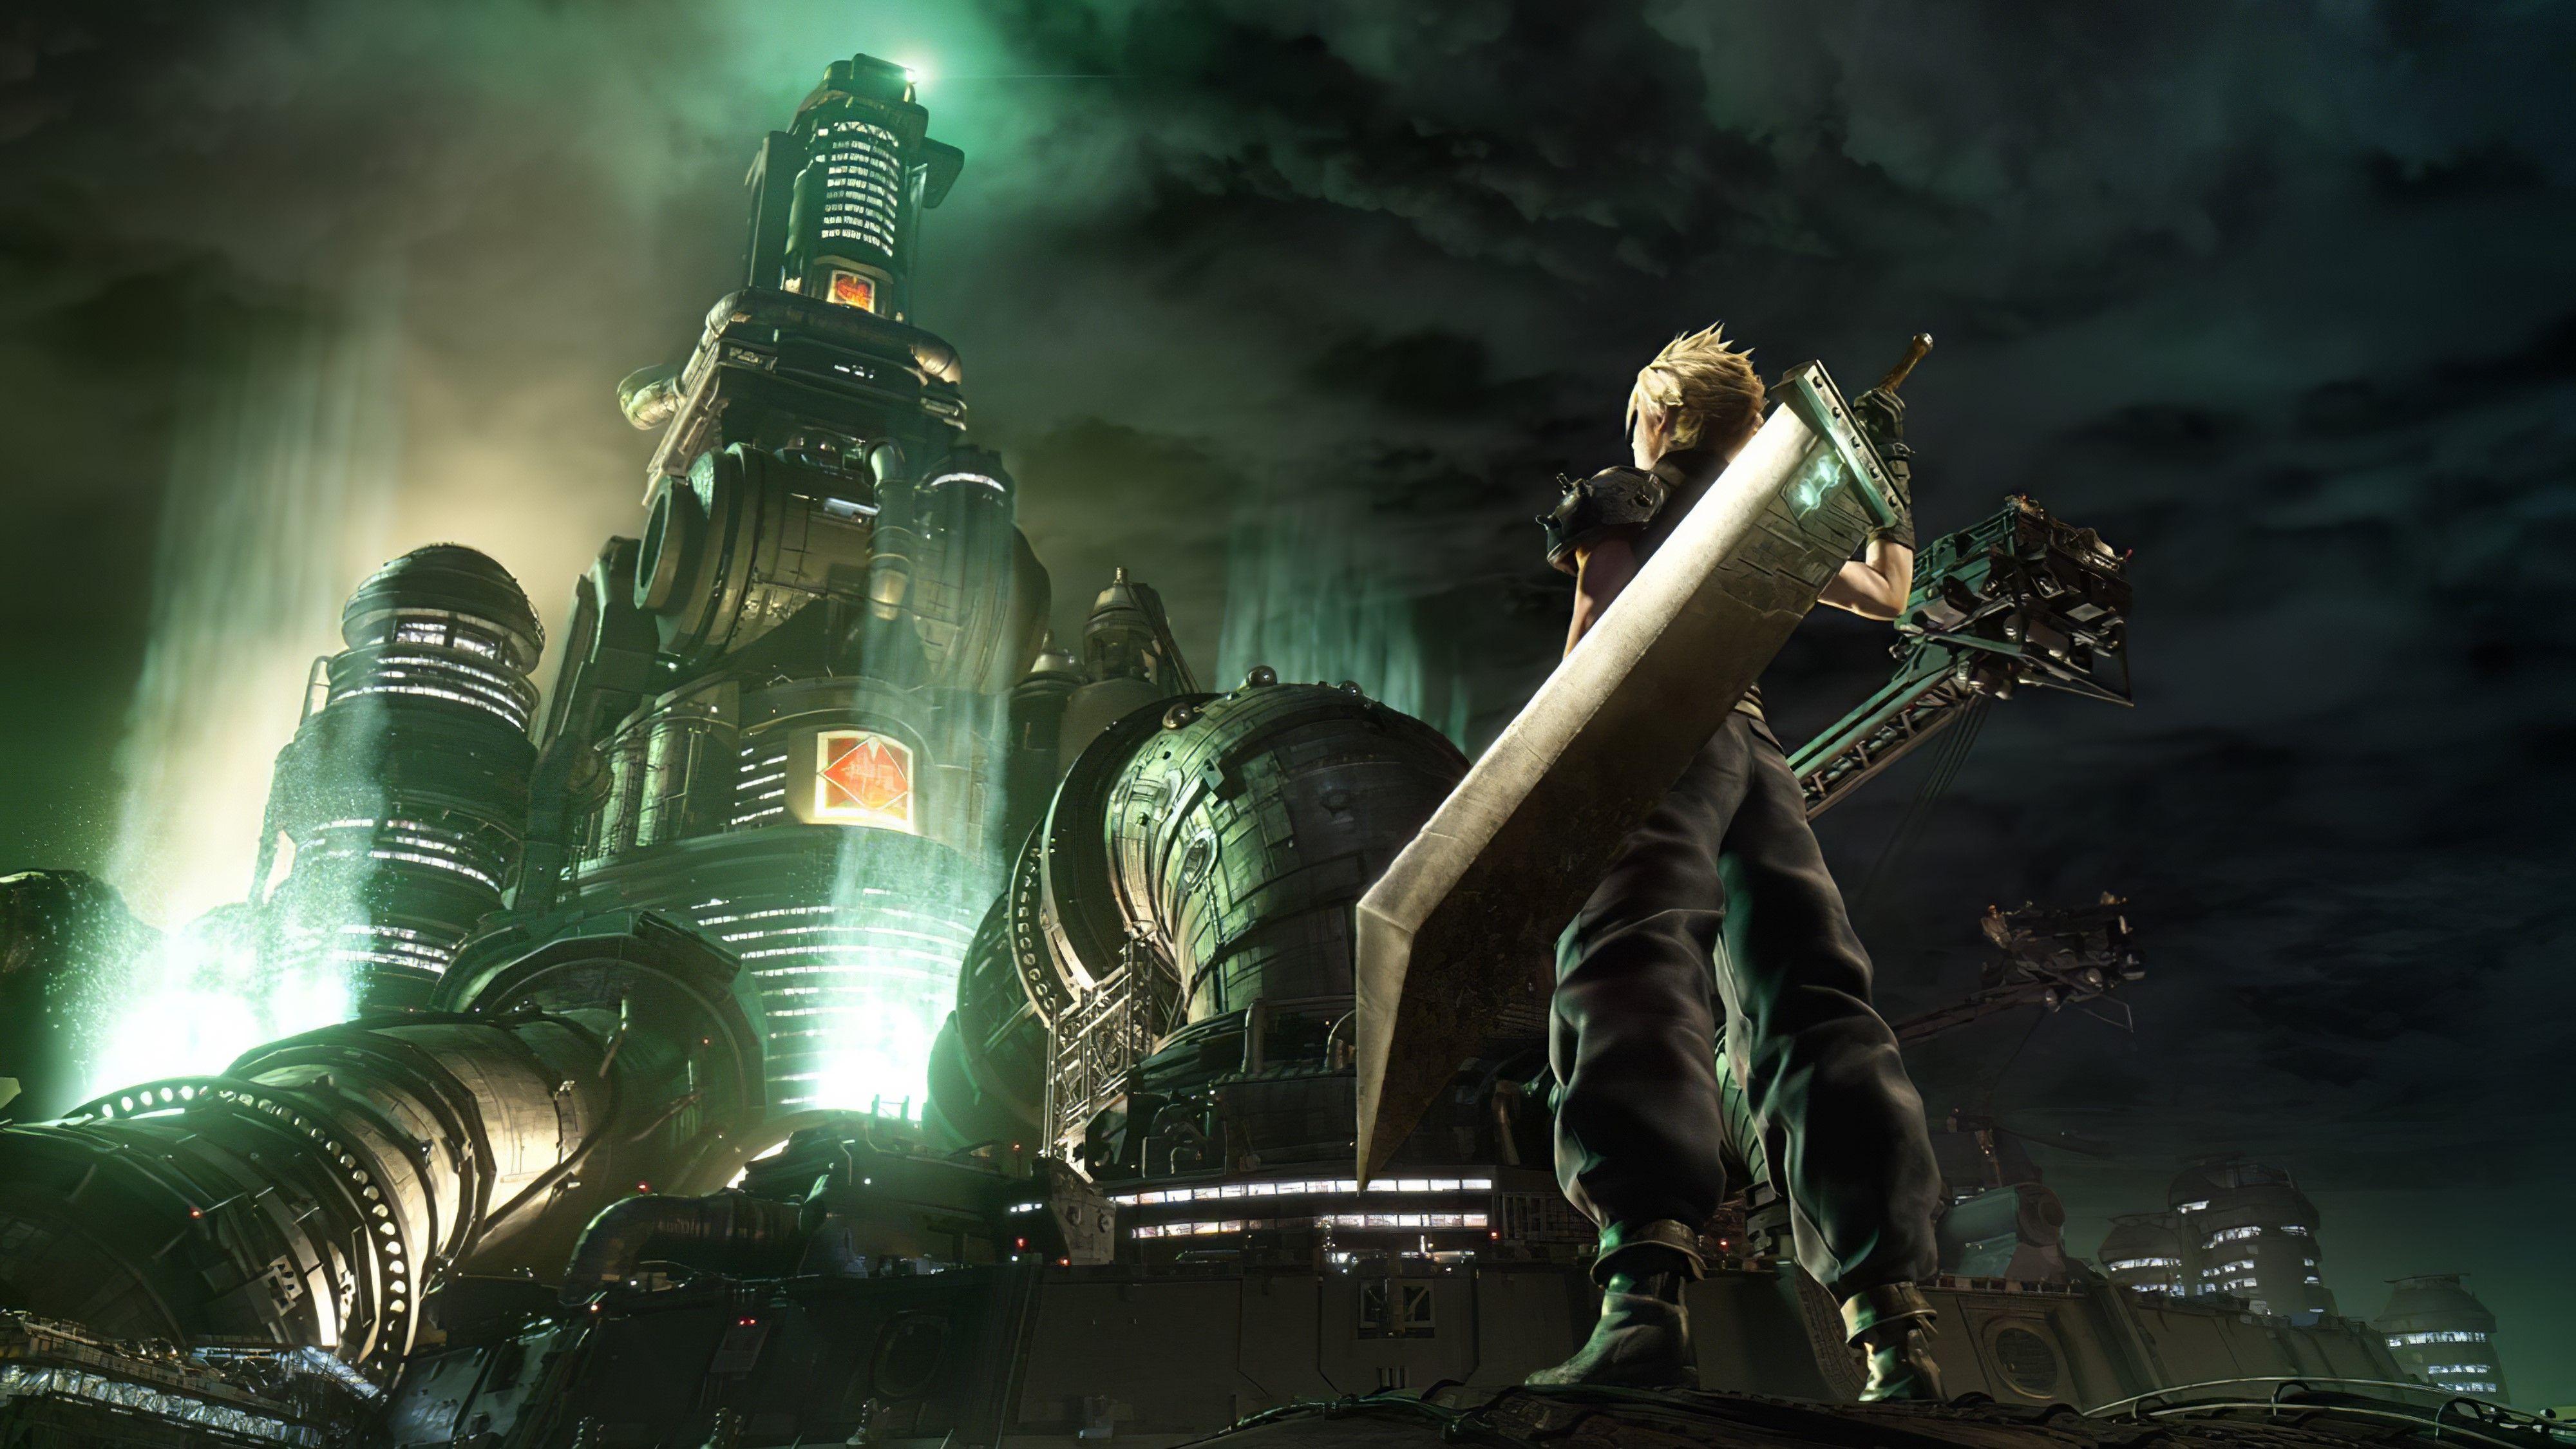 Wallpaper  Final Fantasy VII Cloud Strife Sephiroth 1920x998   orsted2222  2232440  HD Wallpapers  WallHere